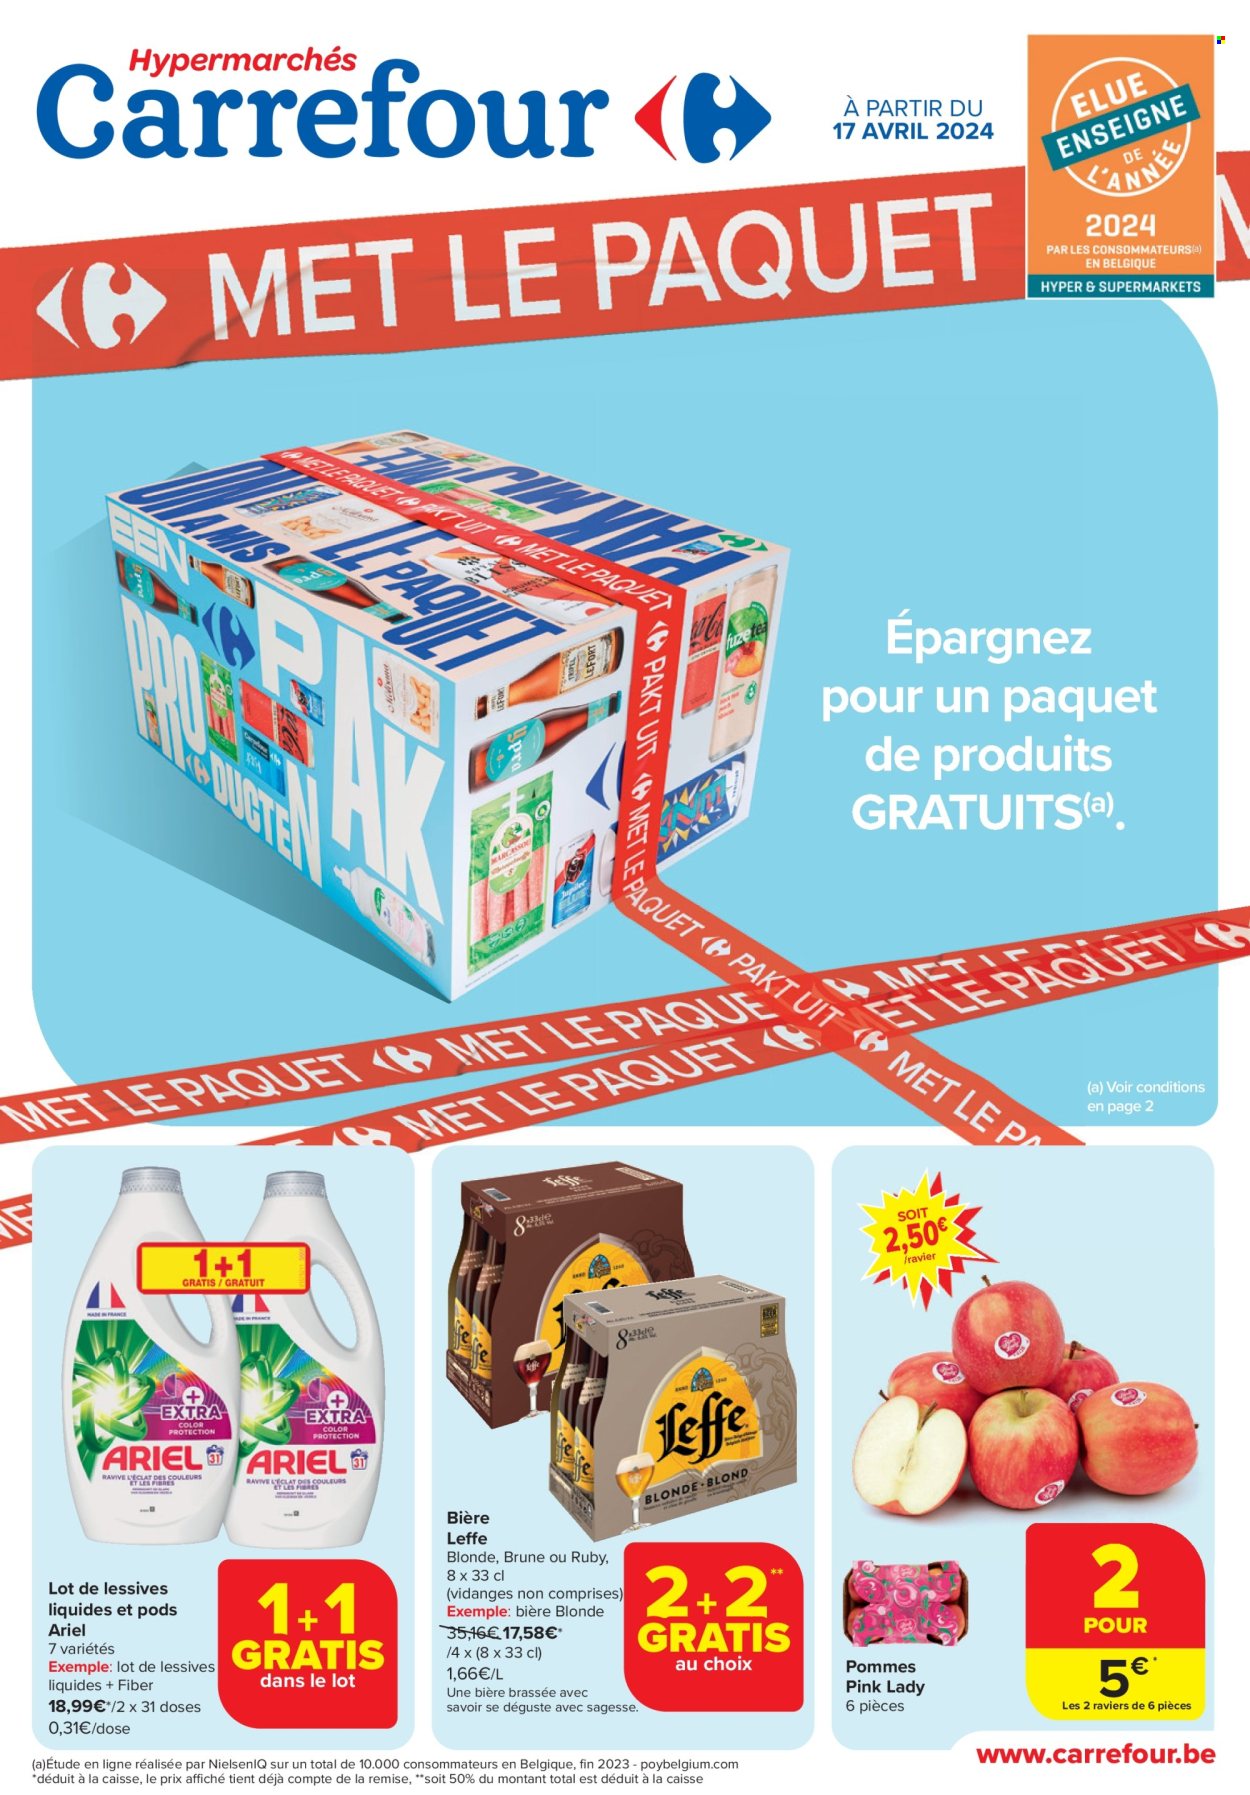 Catalogue Carrefour hypermarkt - 17.4.2024 - 29.4.2024. Page 1.